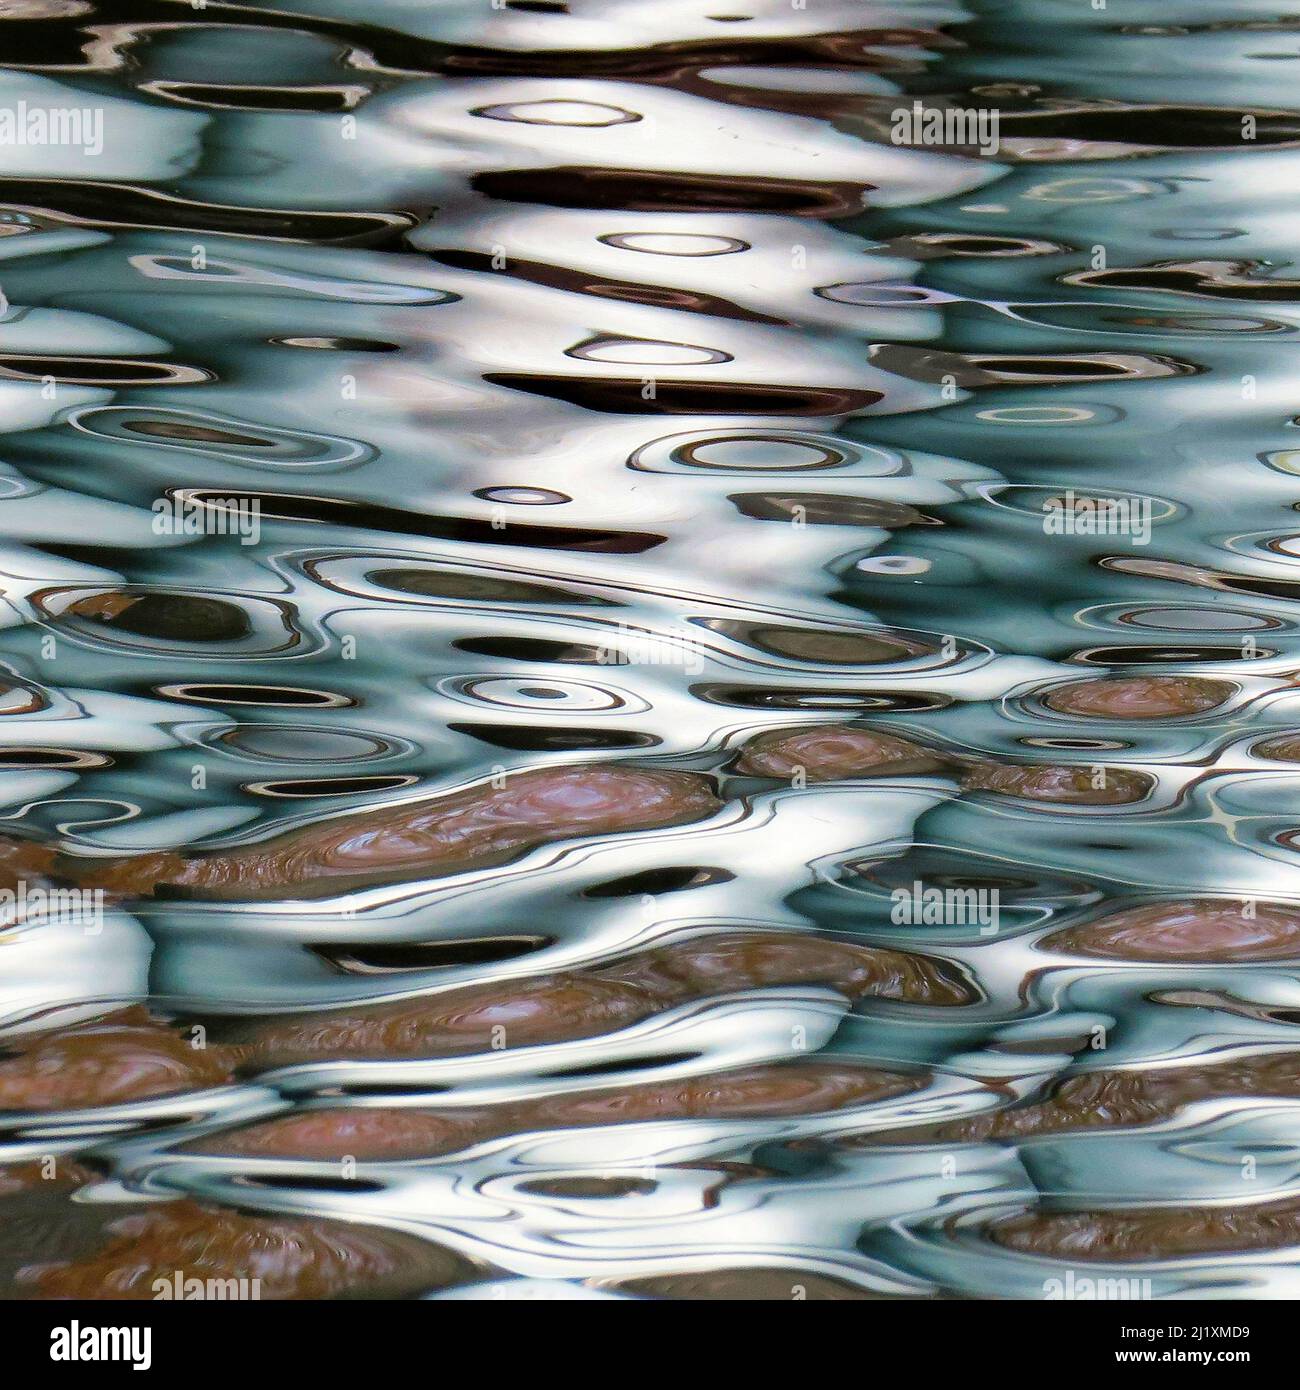 British waterway abstract photograph showing reflected pattern, texture, shape, and movement, with a colour pallette showing in light forms mirrored r Stock Photo